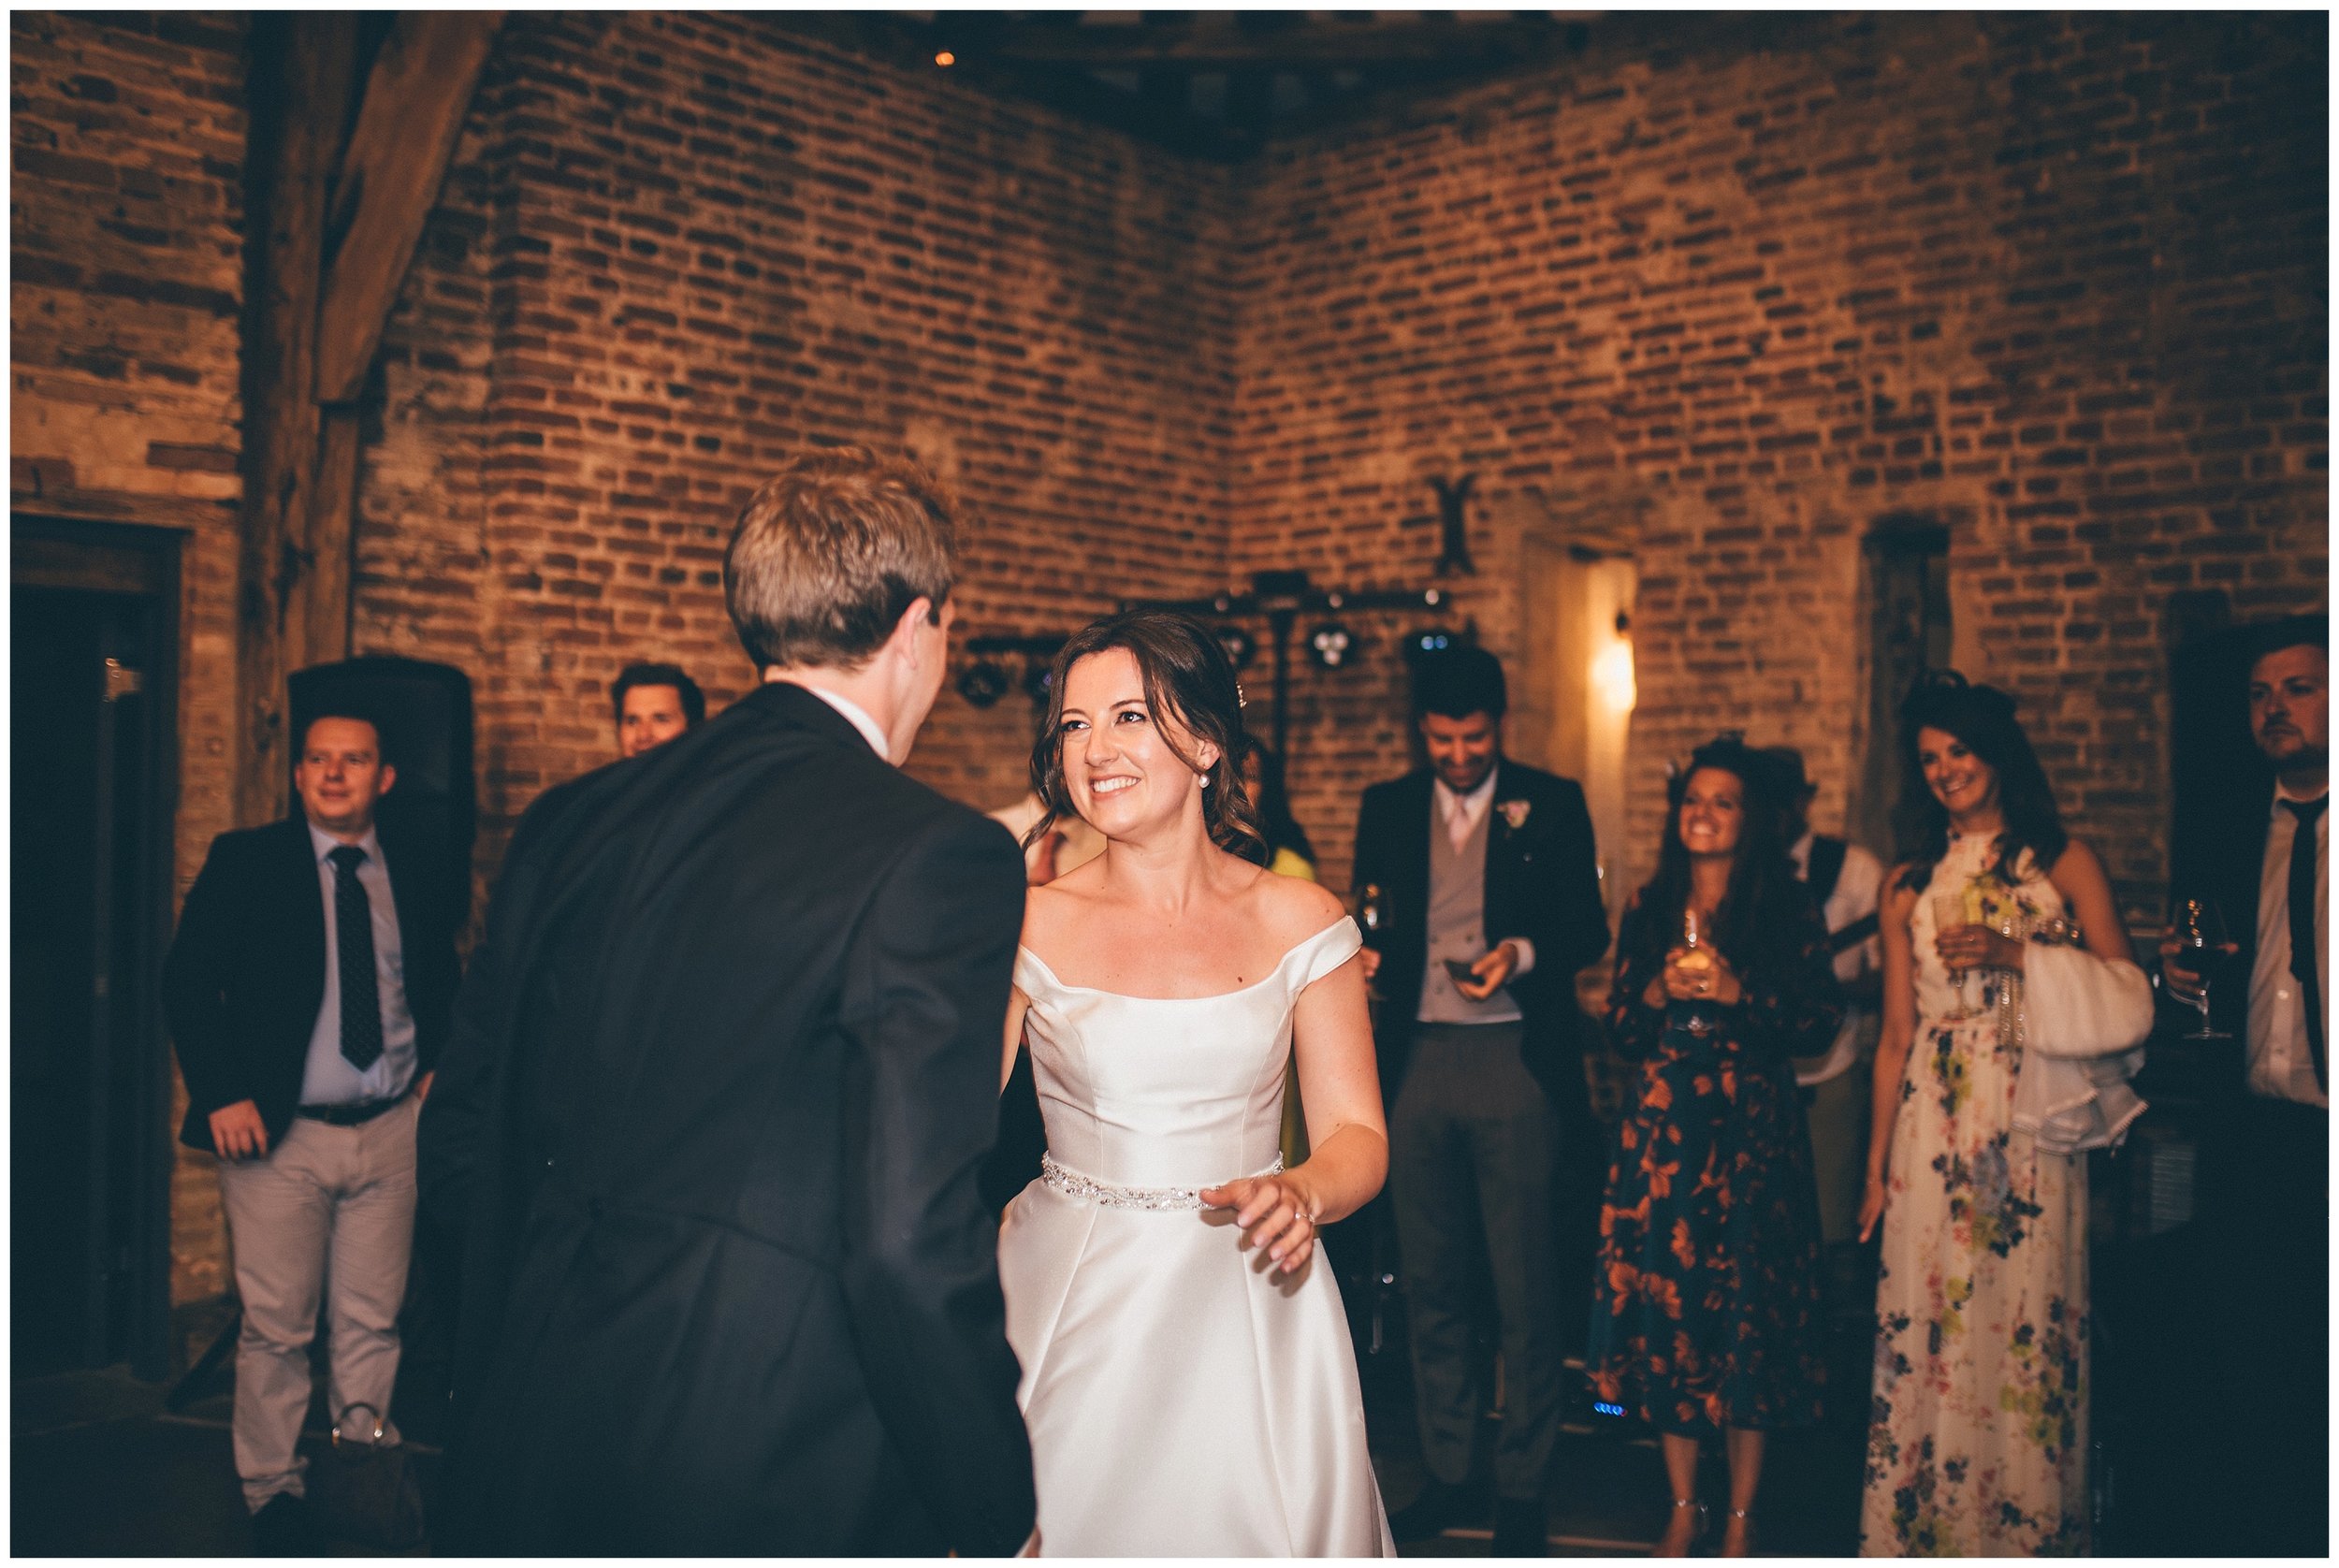 Bride and groom's First Dance at Henham Park wedding barns in Southwold.